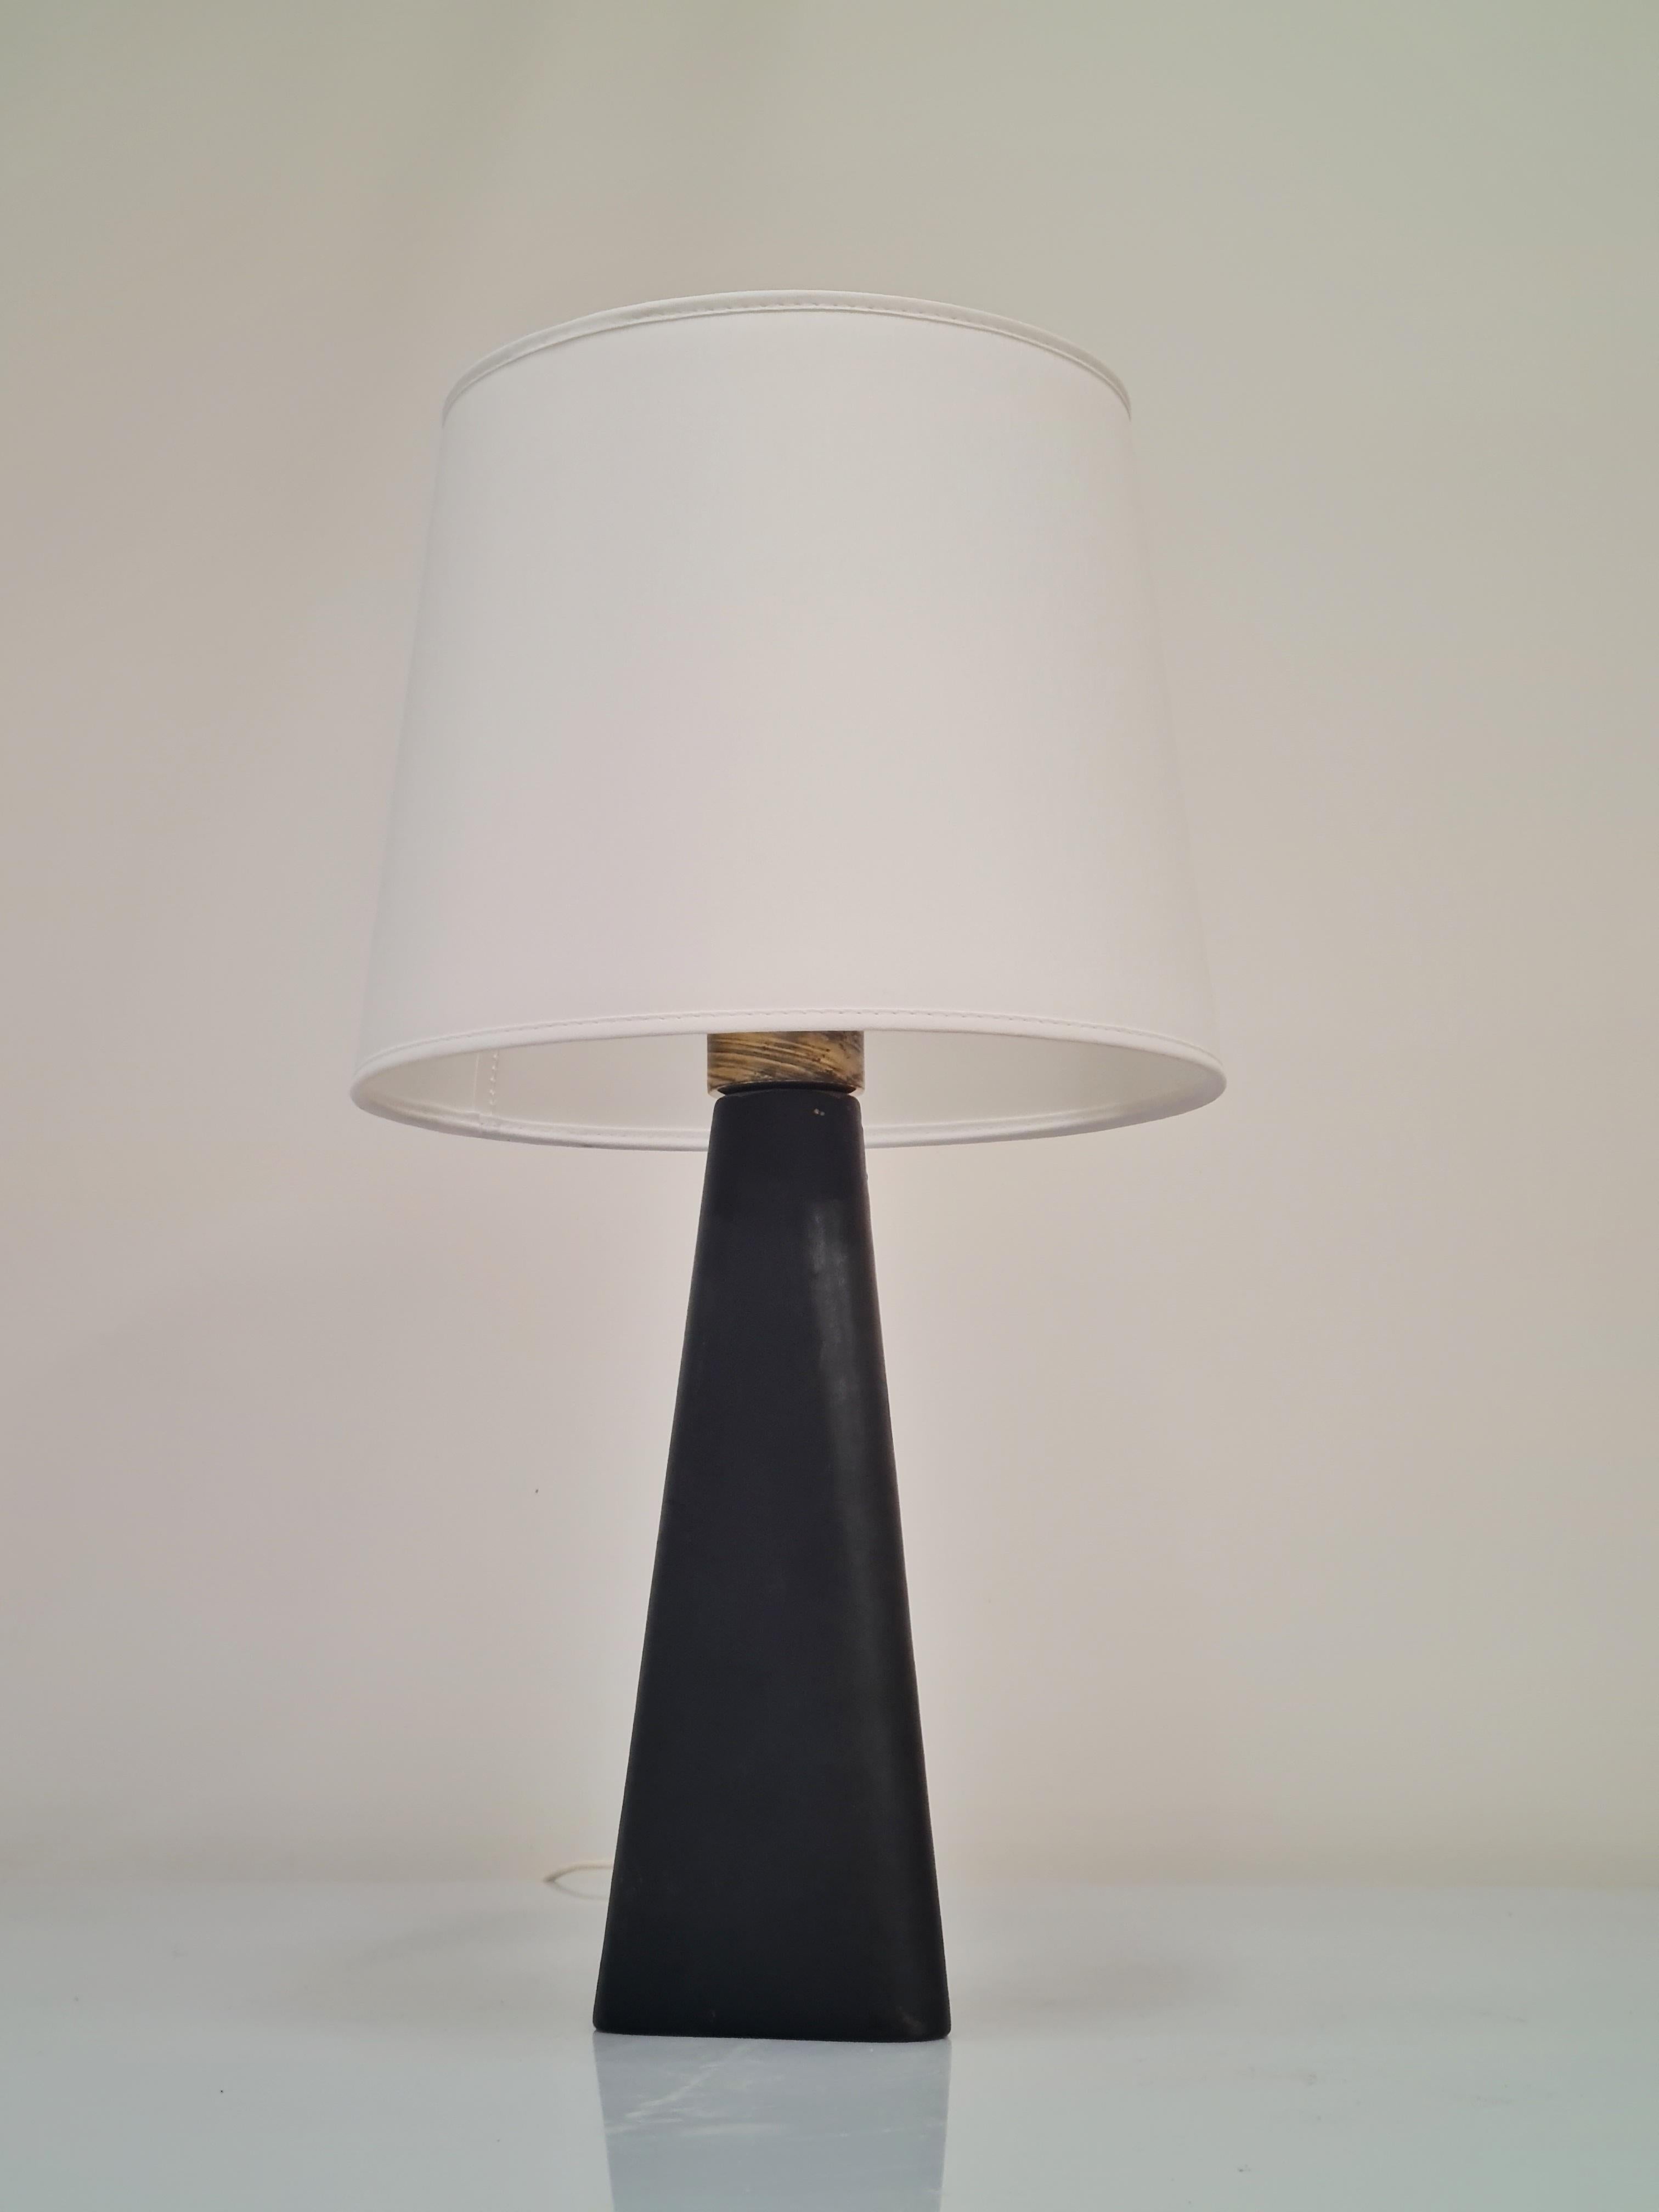 Lisa Johansson-Papé Table Lamp 46-186 LJP in Leather and Silk, Orno For Sale 2